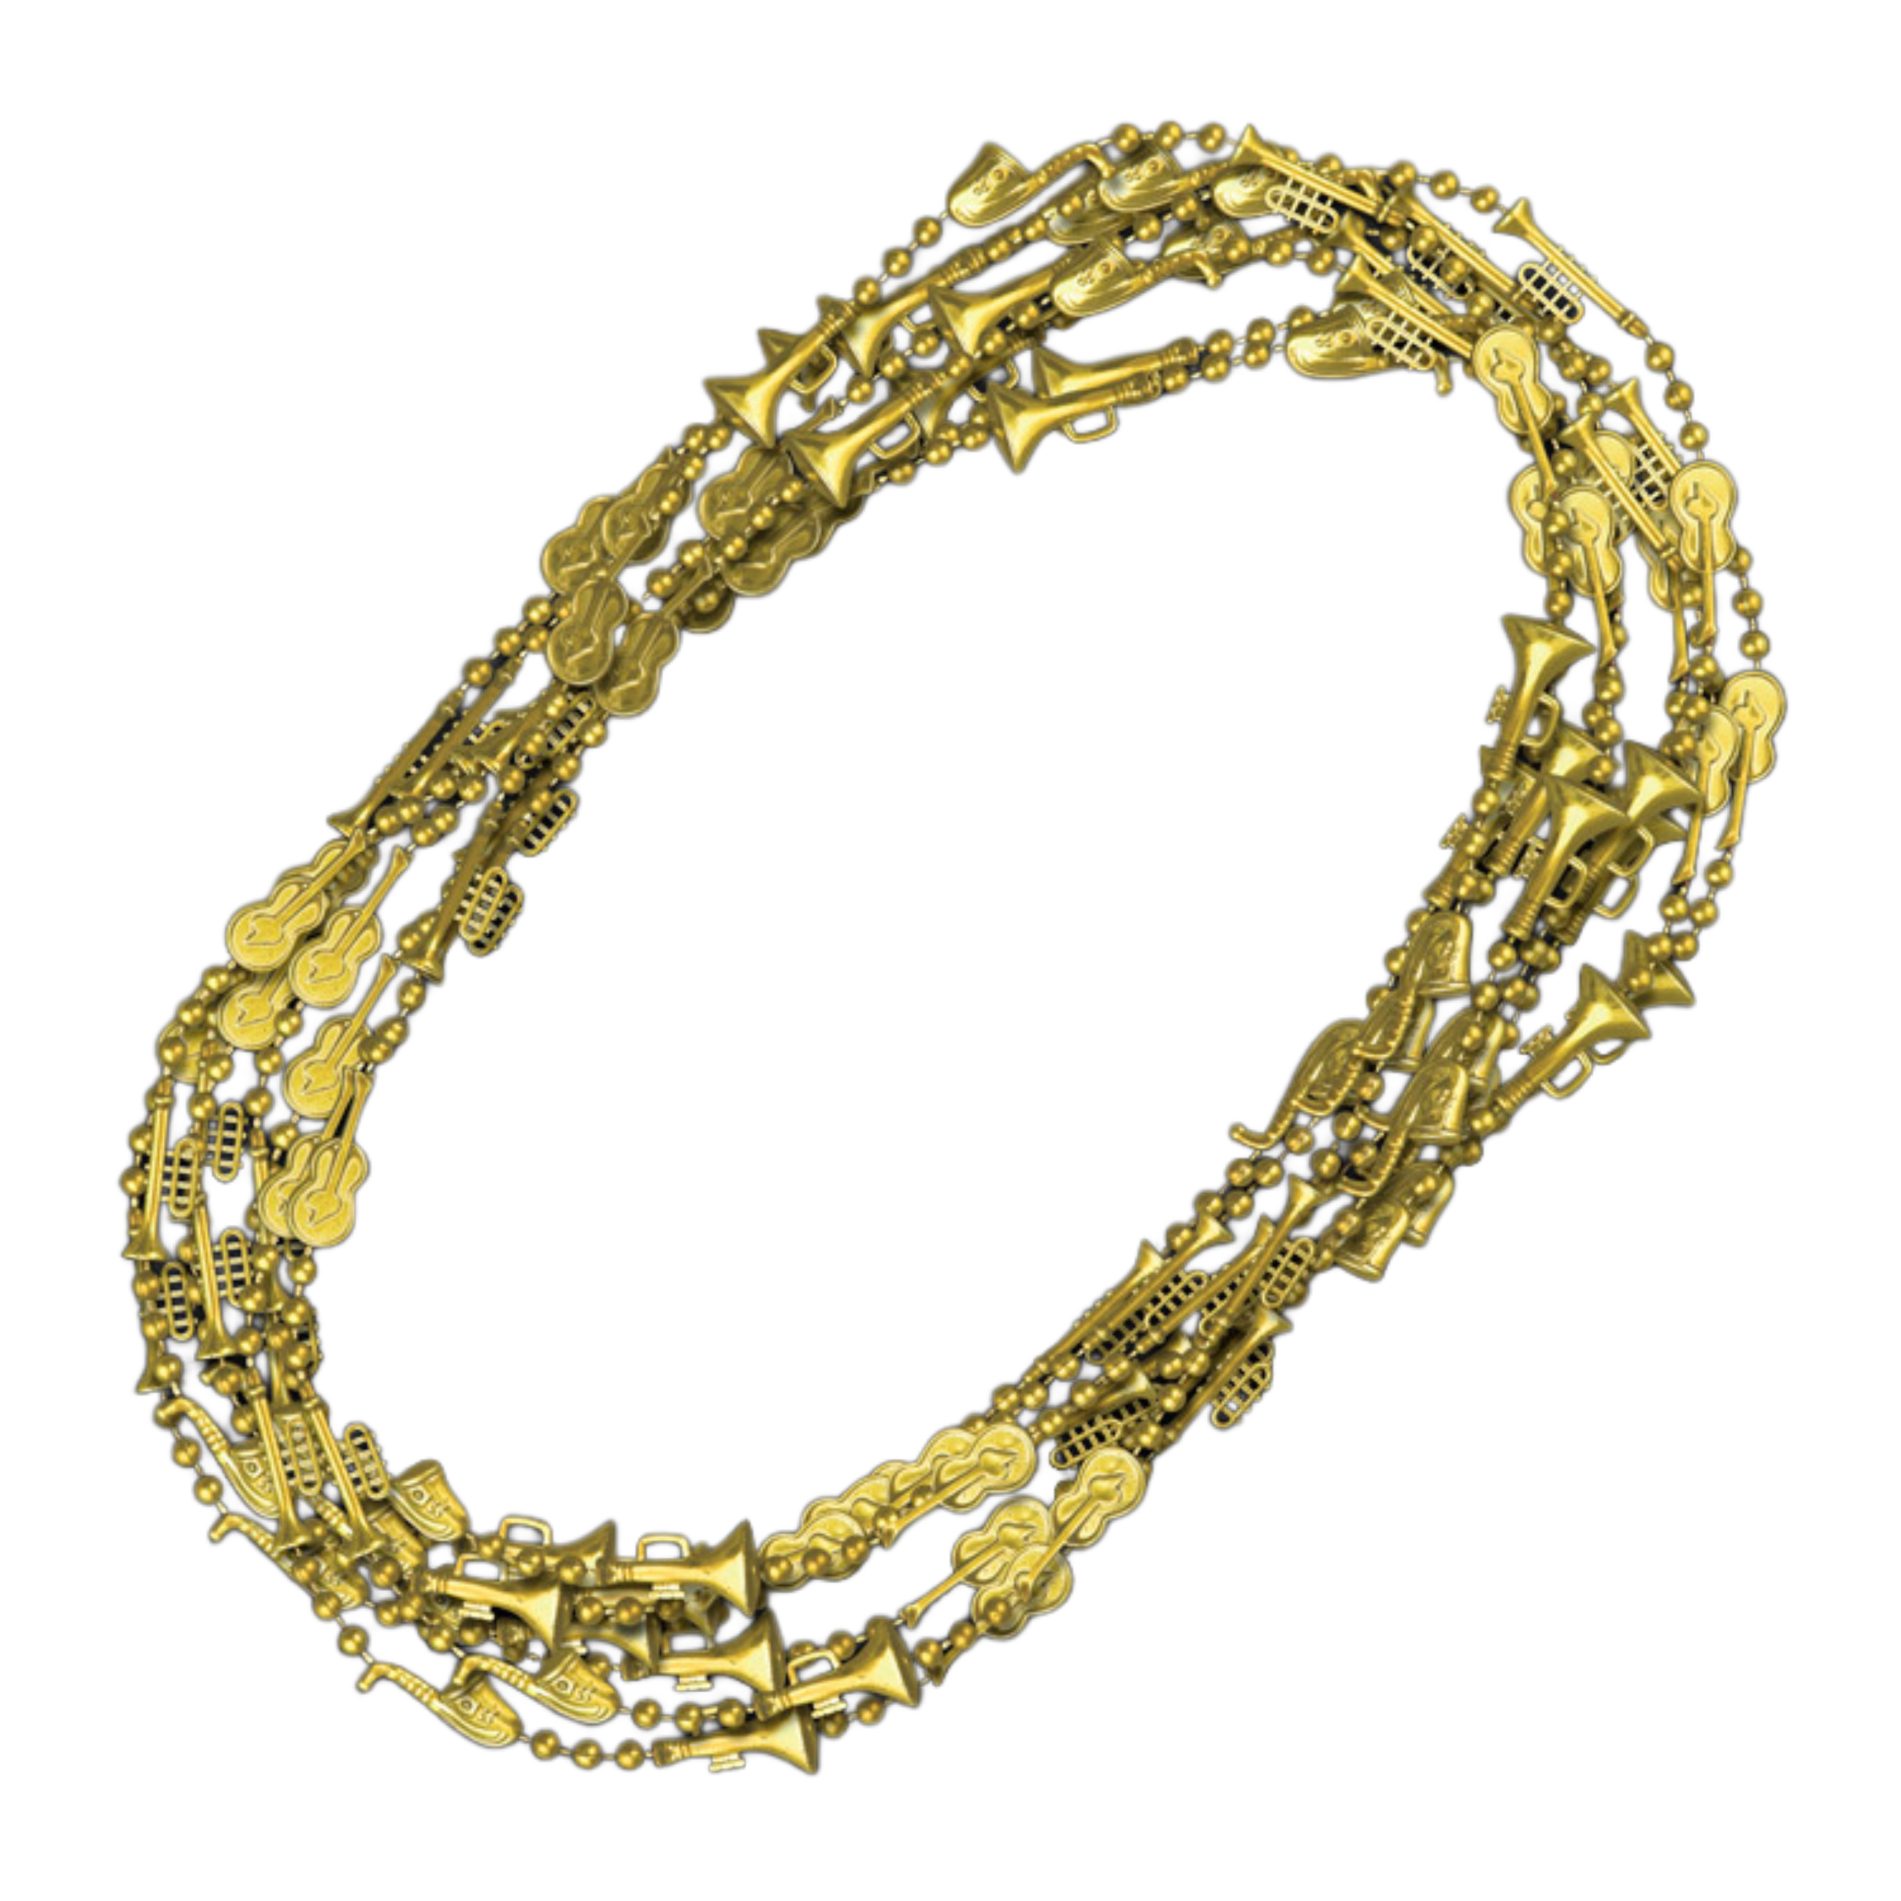 Non Light Up Metallic Gold Plated Jazz Instruments Beaded Necklace Pack of 12 All Products 6